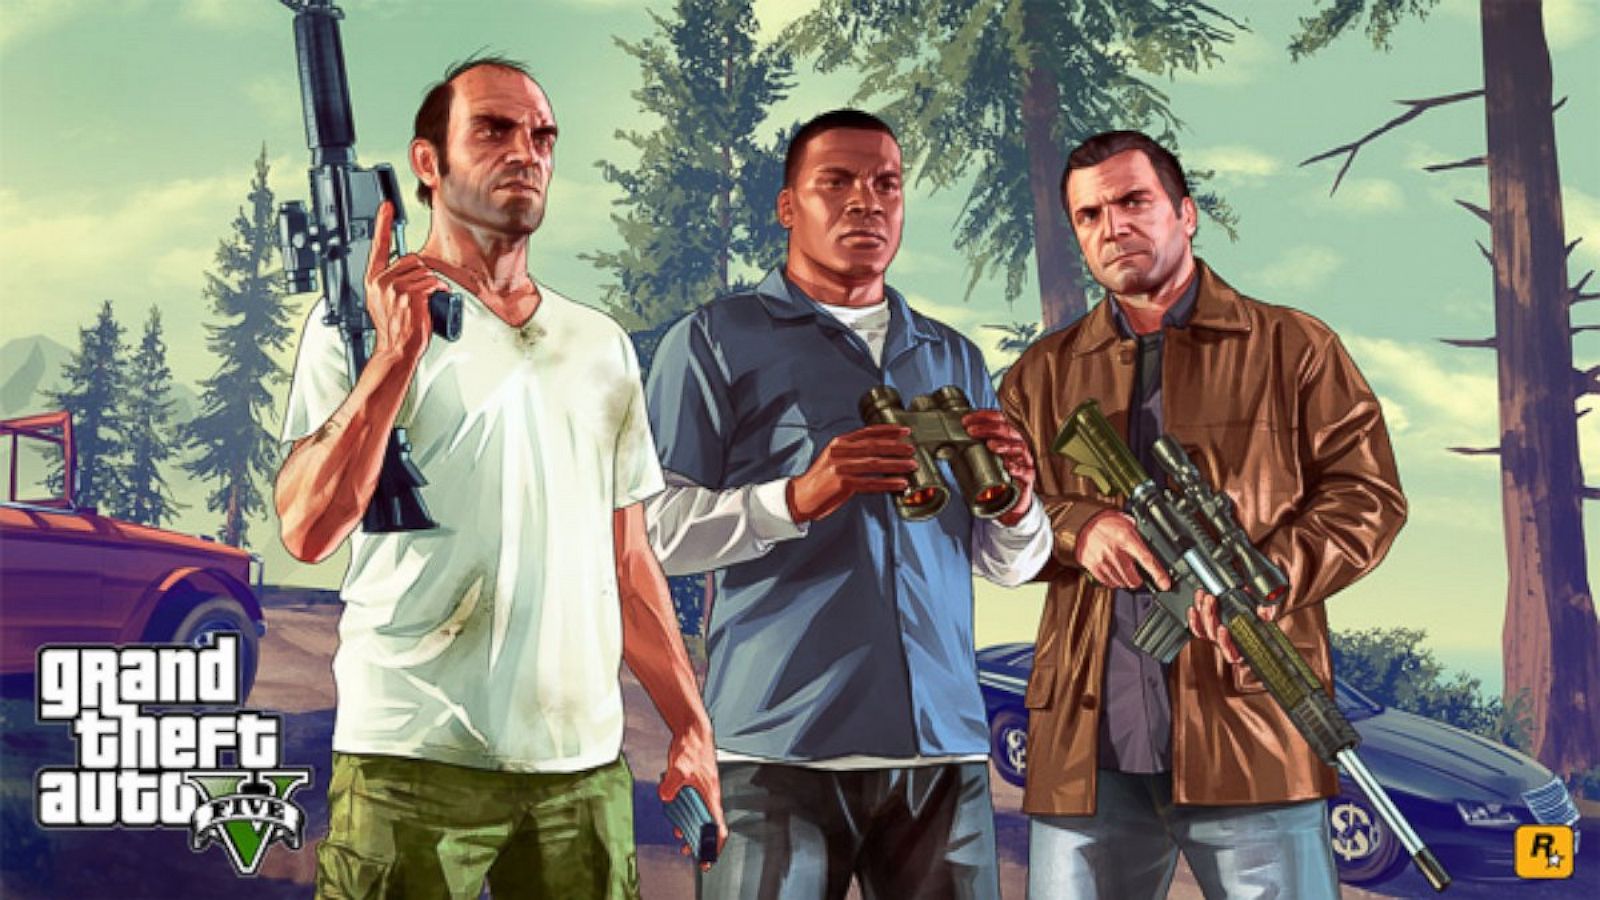 GTA V Launches: What The Latest Game in the Grand Theft Auto Series Does  Differently - ABC News